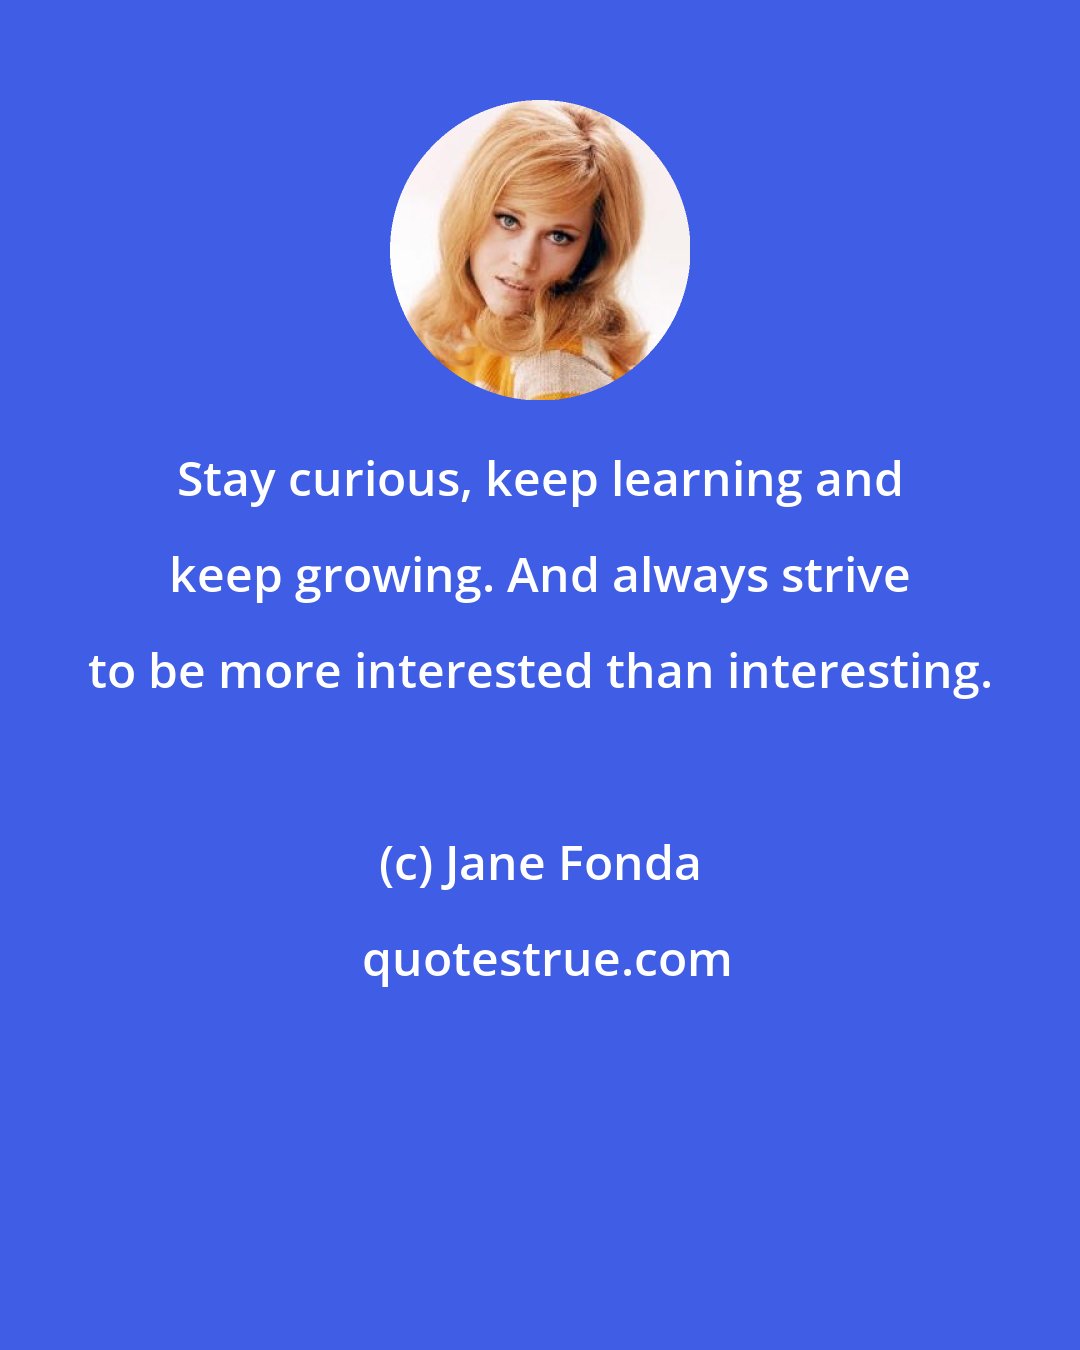 Jane Fonda: Stay curious, keep learning and keep growing. And always strive to be more interested than interesting.